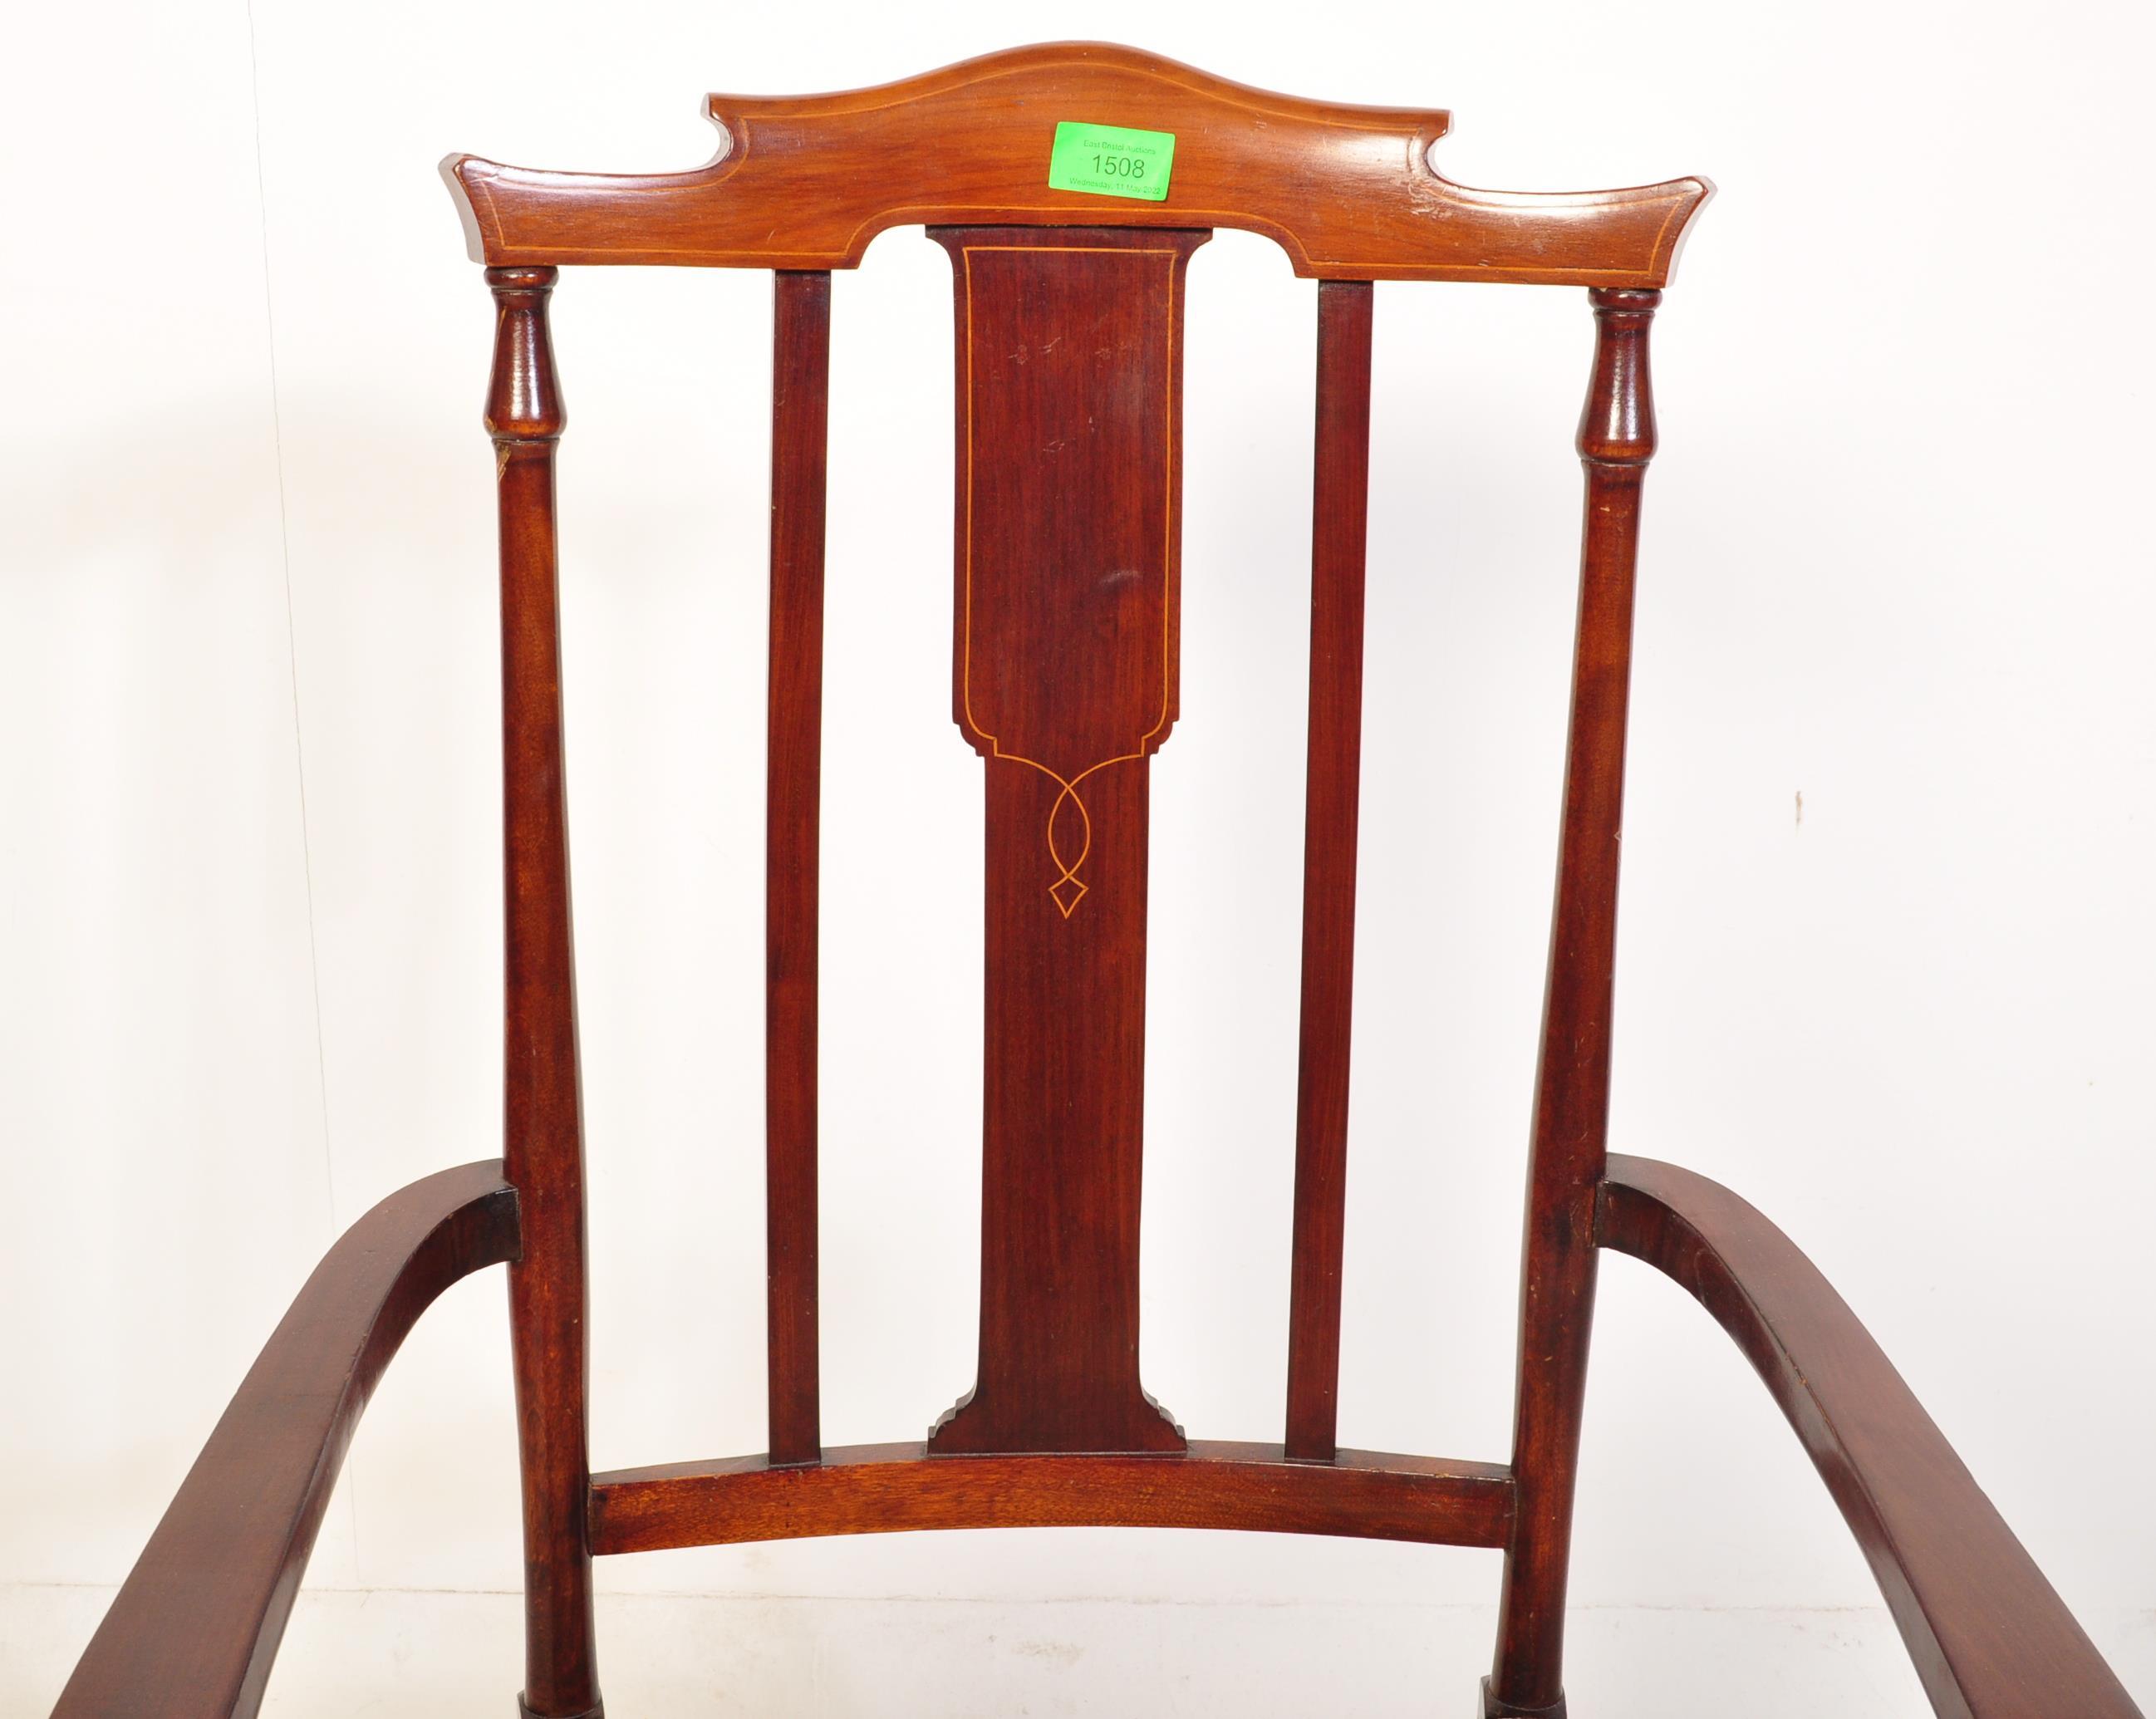 EDWARDIAN BEECH AND ELM CHAIR - Image 3 of 7